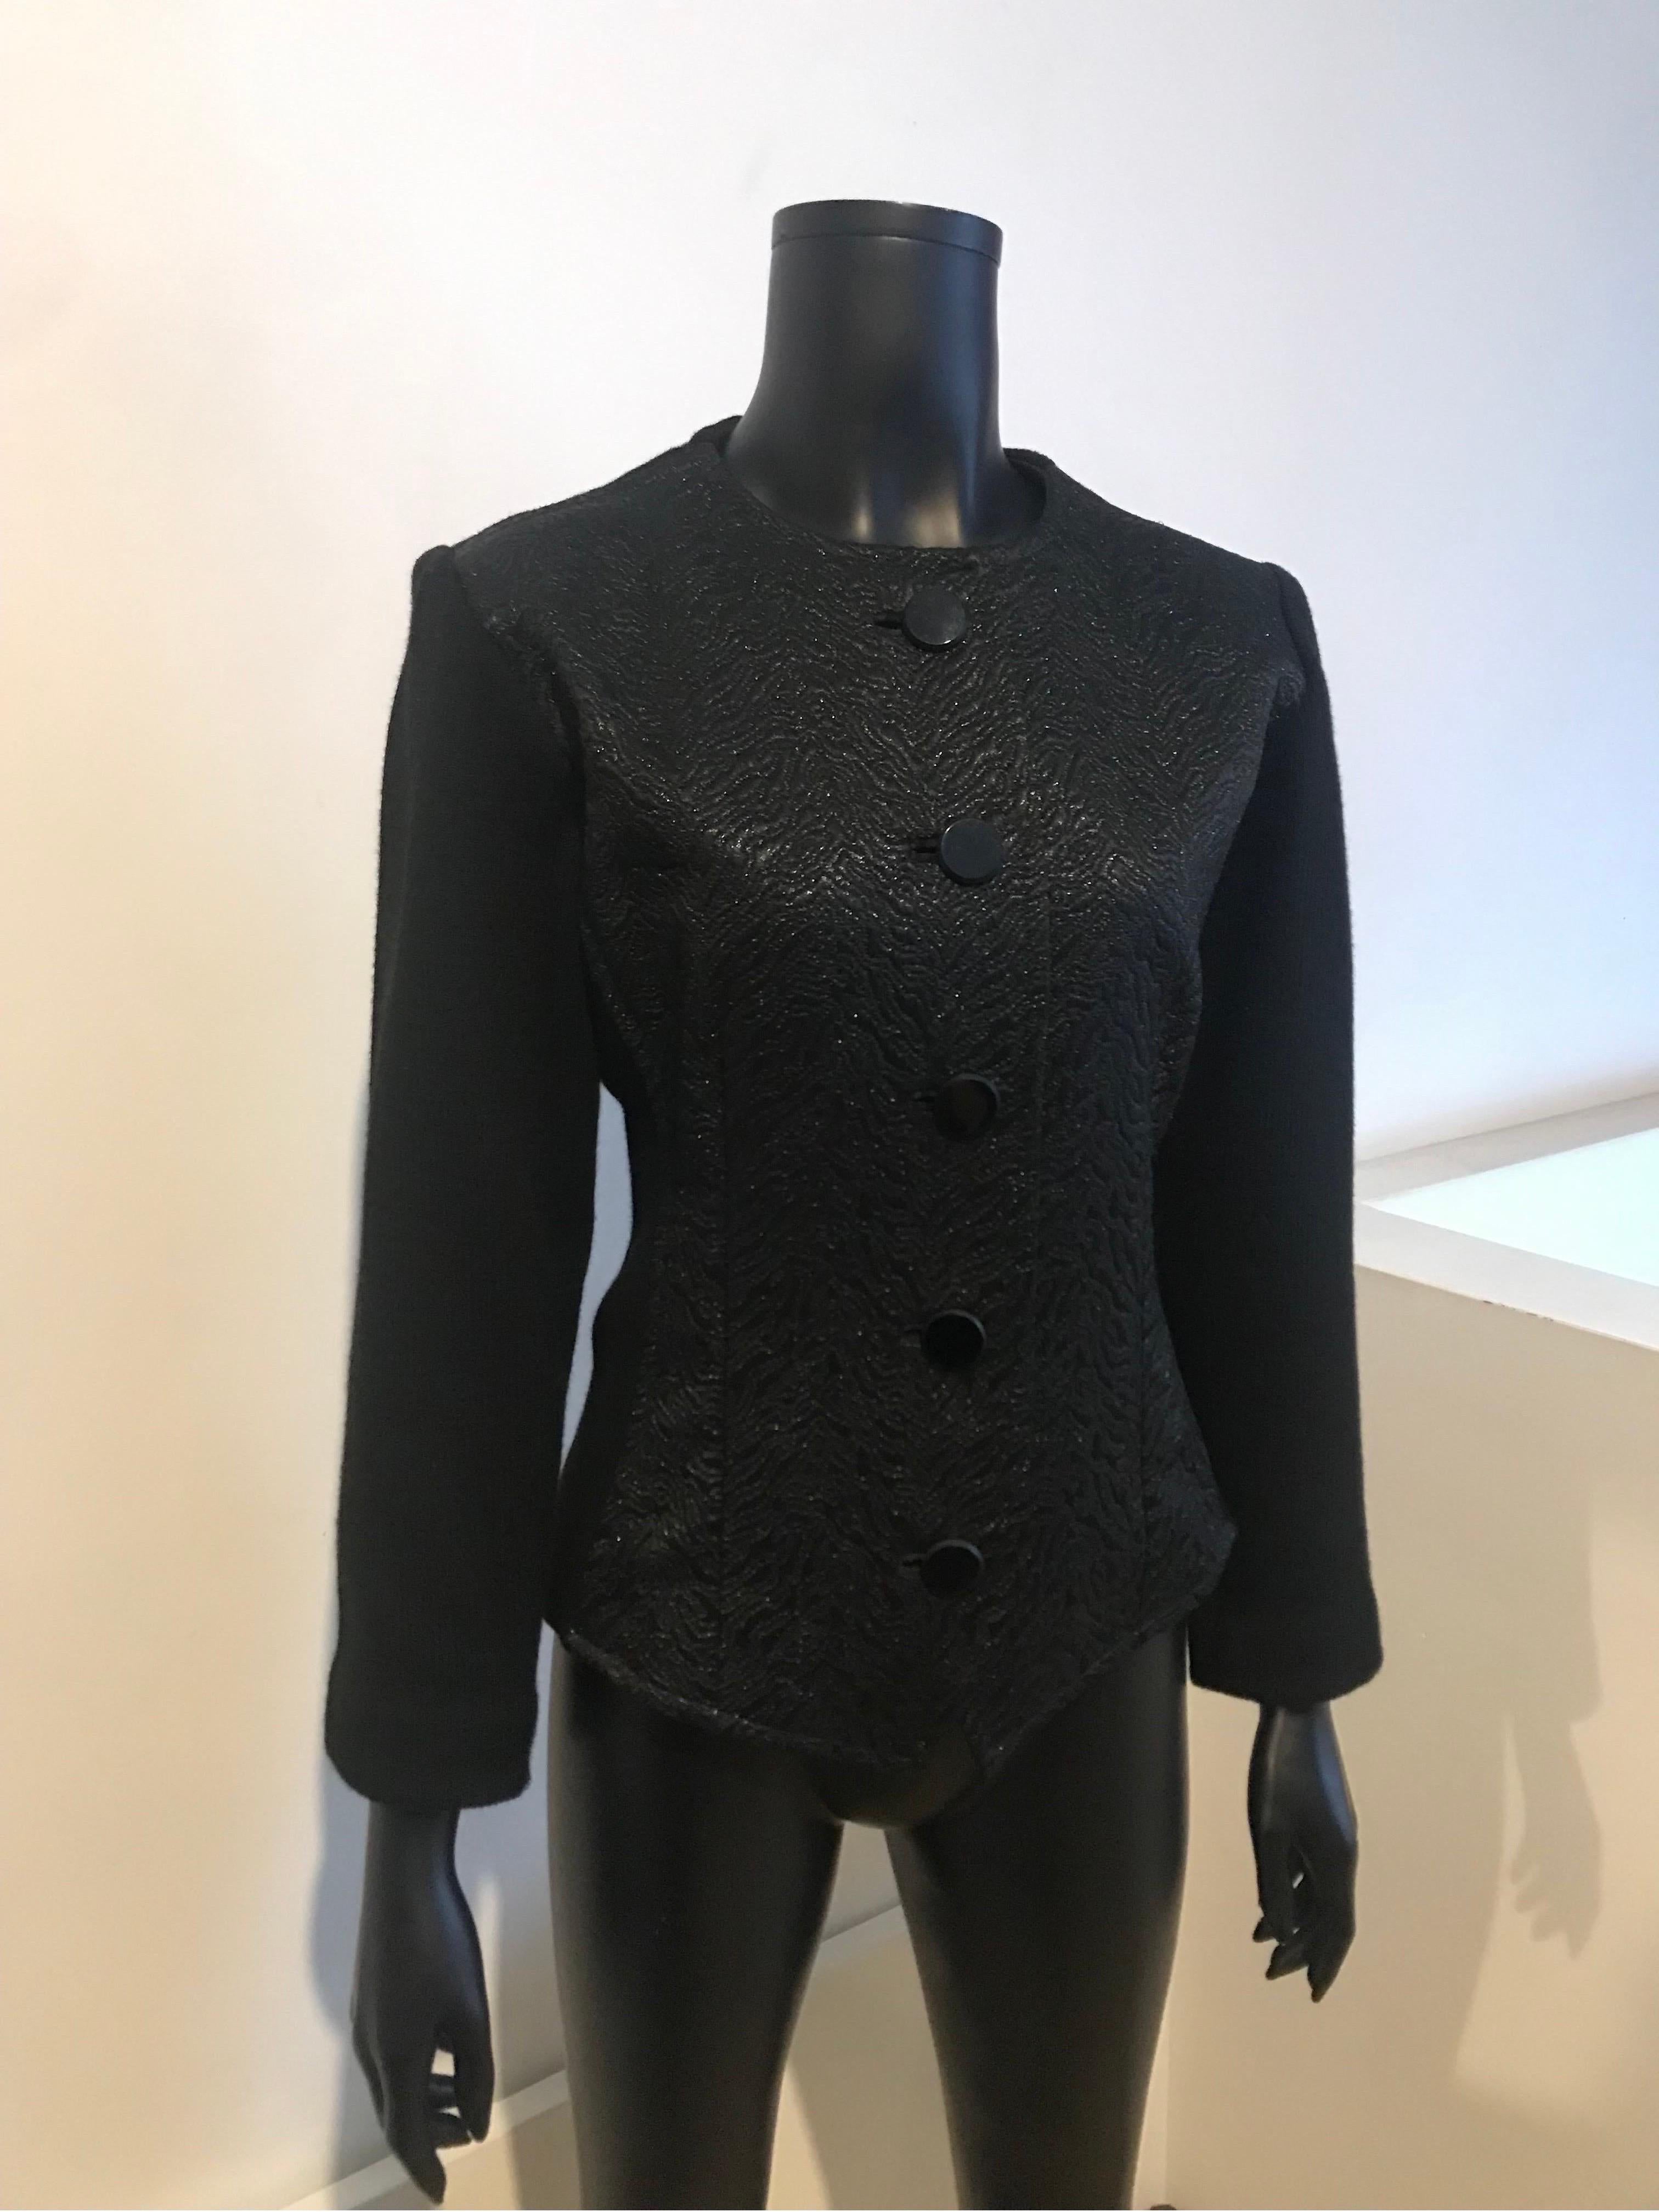 Vintage 1970’s Yves Saint Laurent Rive Gauche brocade & knit evening jacket In Good Condition For Sale In COLLINGWOOD, AU